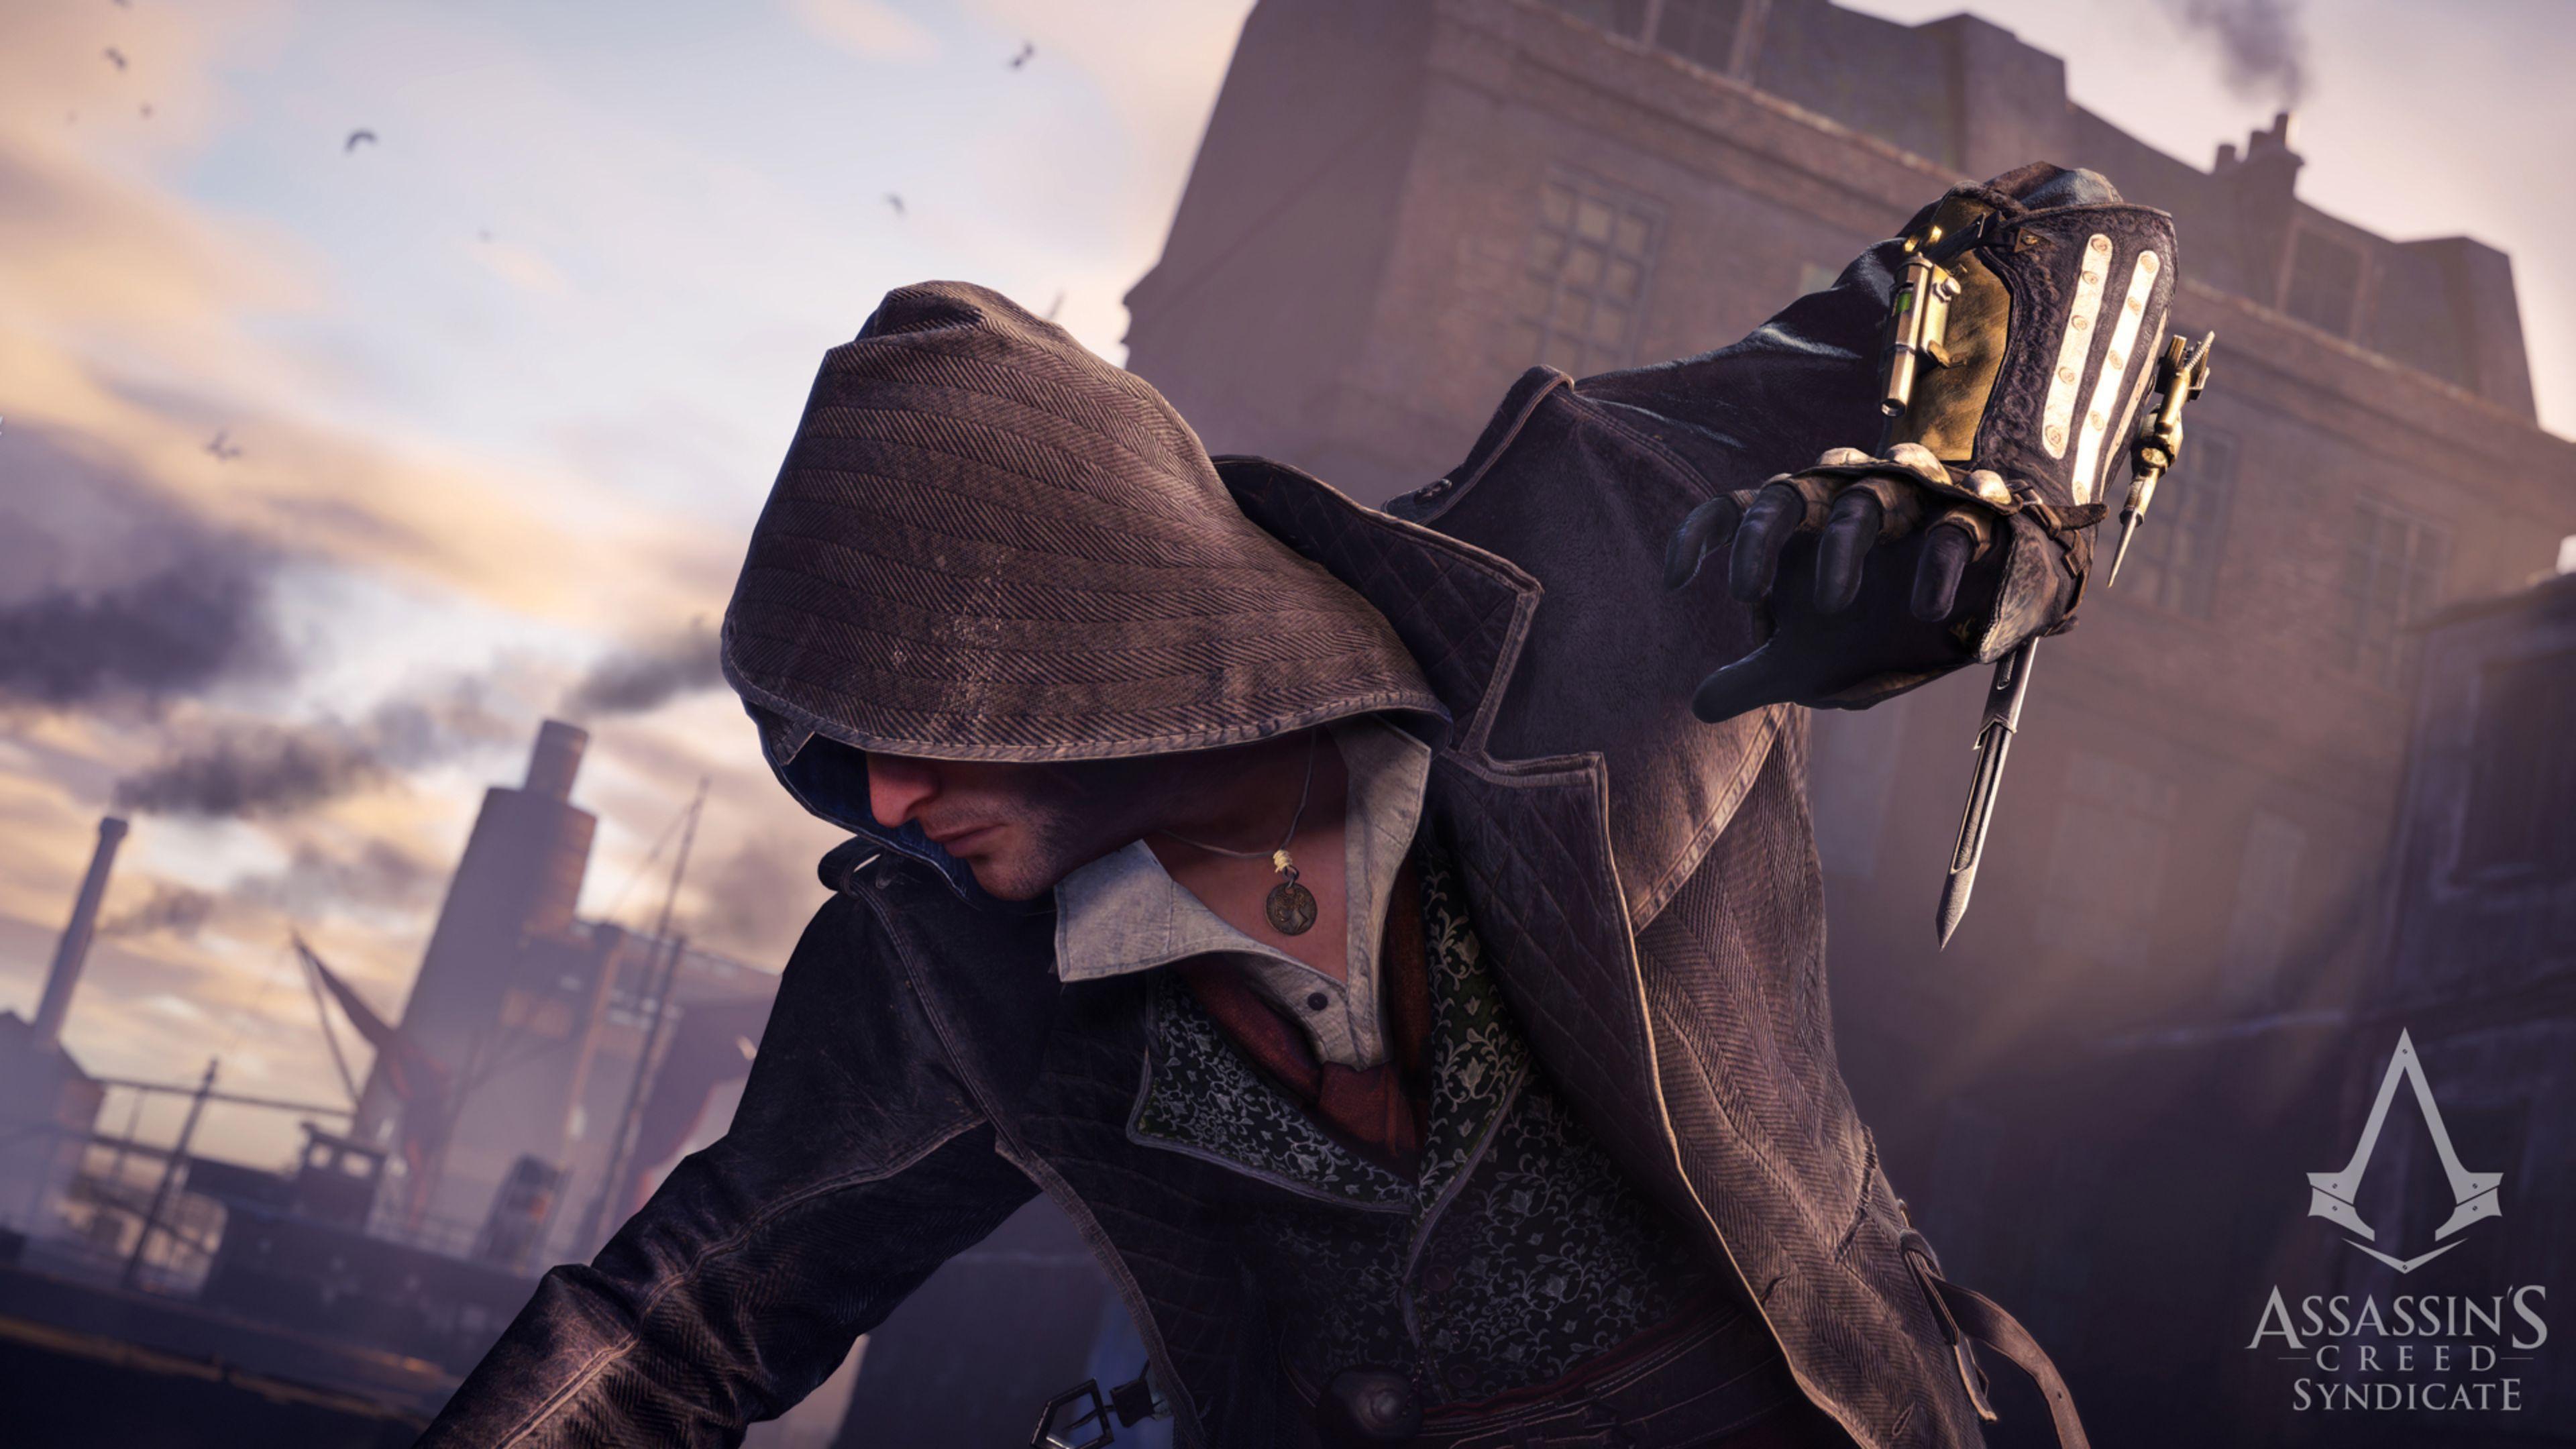 Single Player Assassin&Creed Syndicate 4K Wallpapers